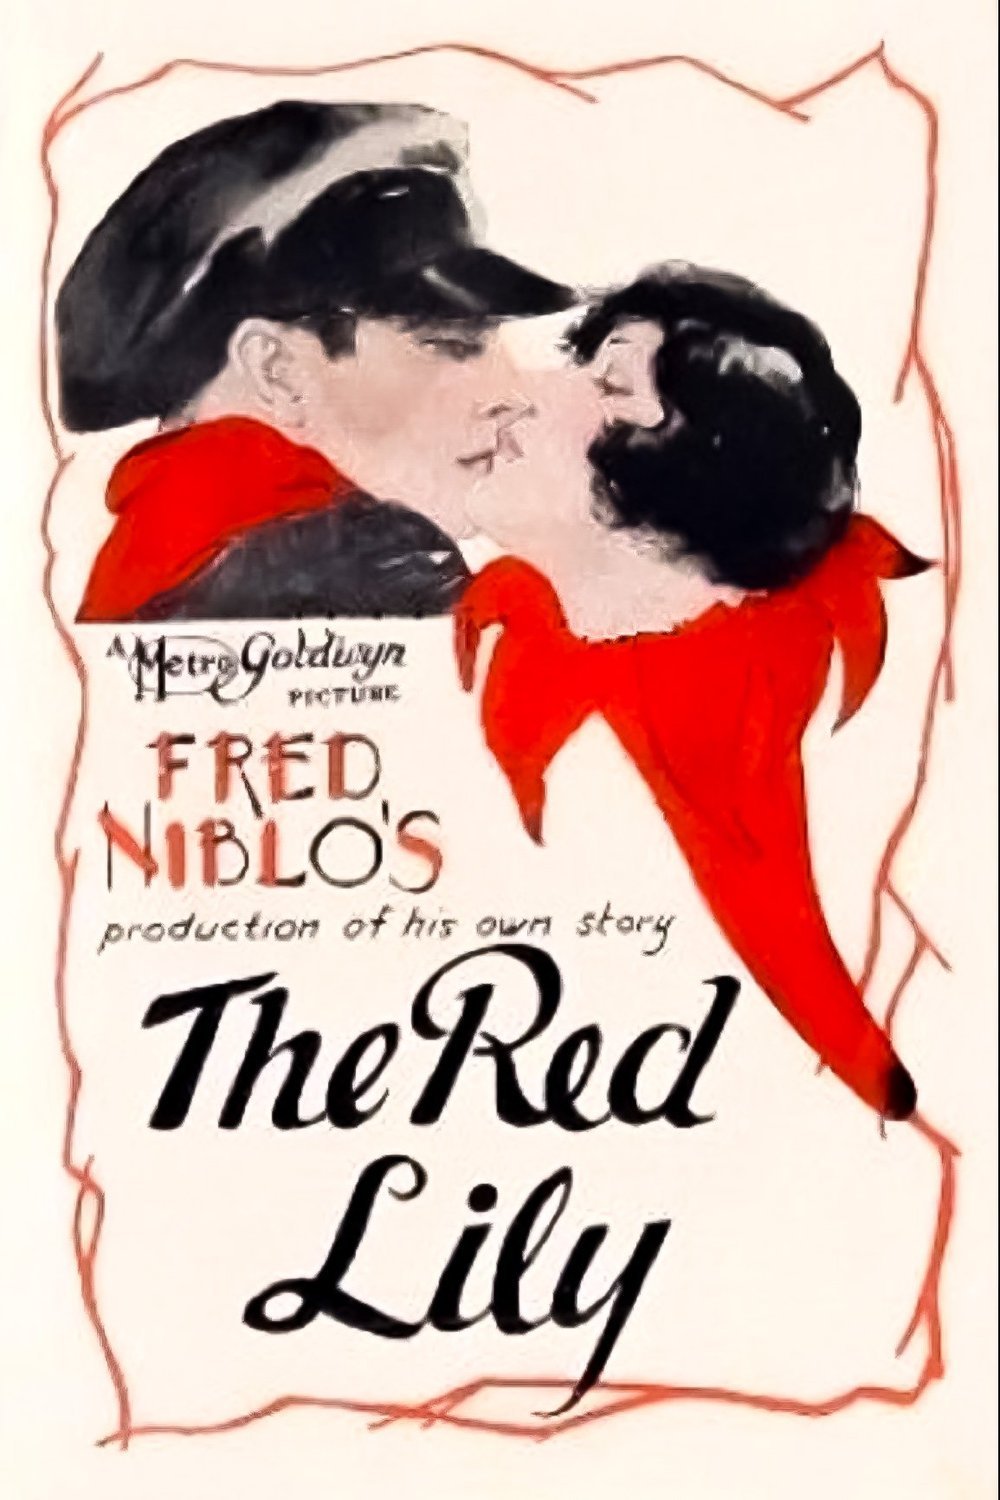 Poster of the movie The Red Lily